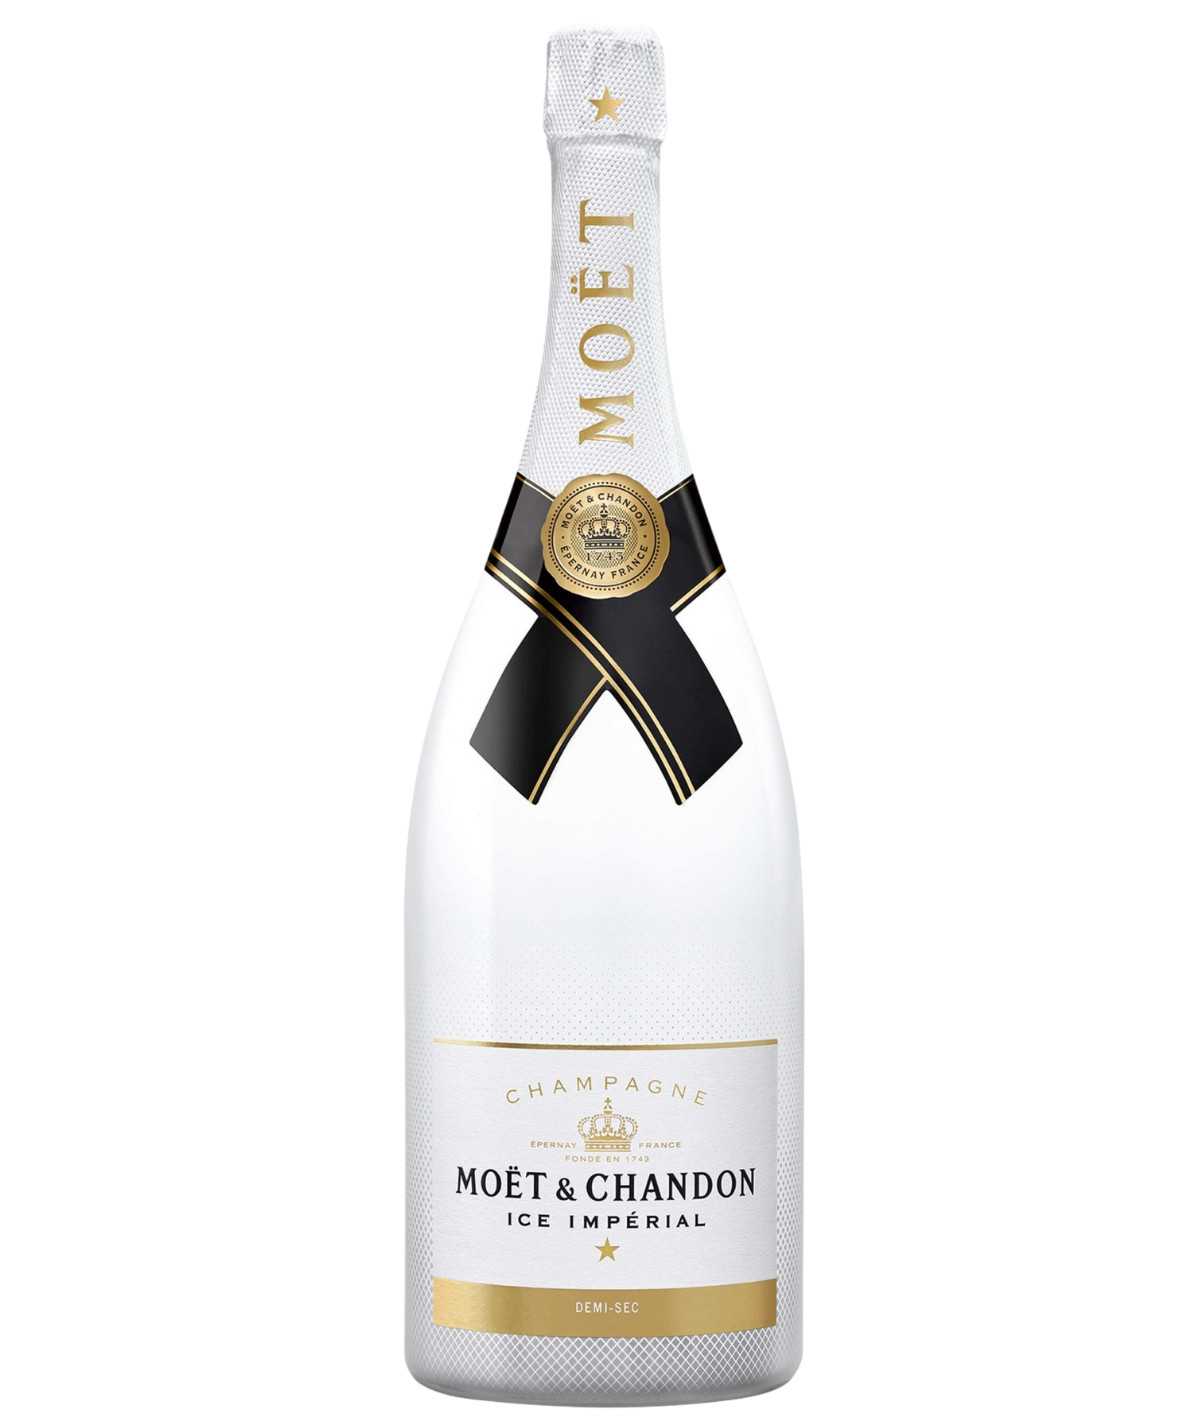 MOET & CHANDON Champagne Ice Impérial